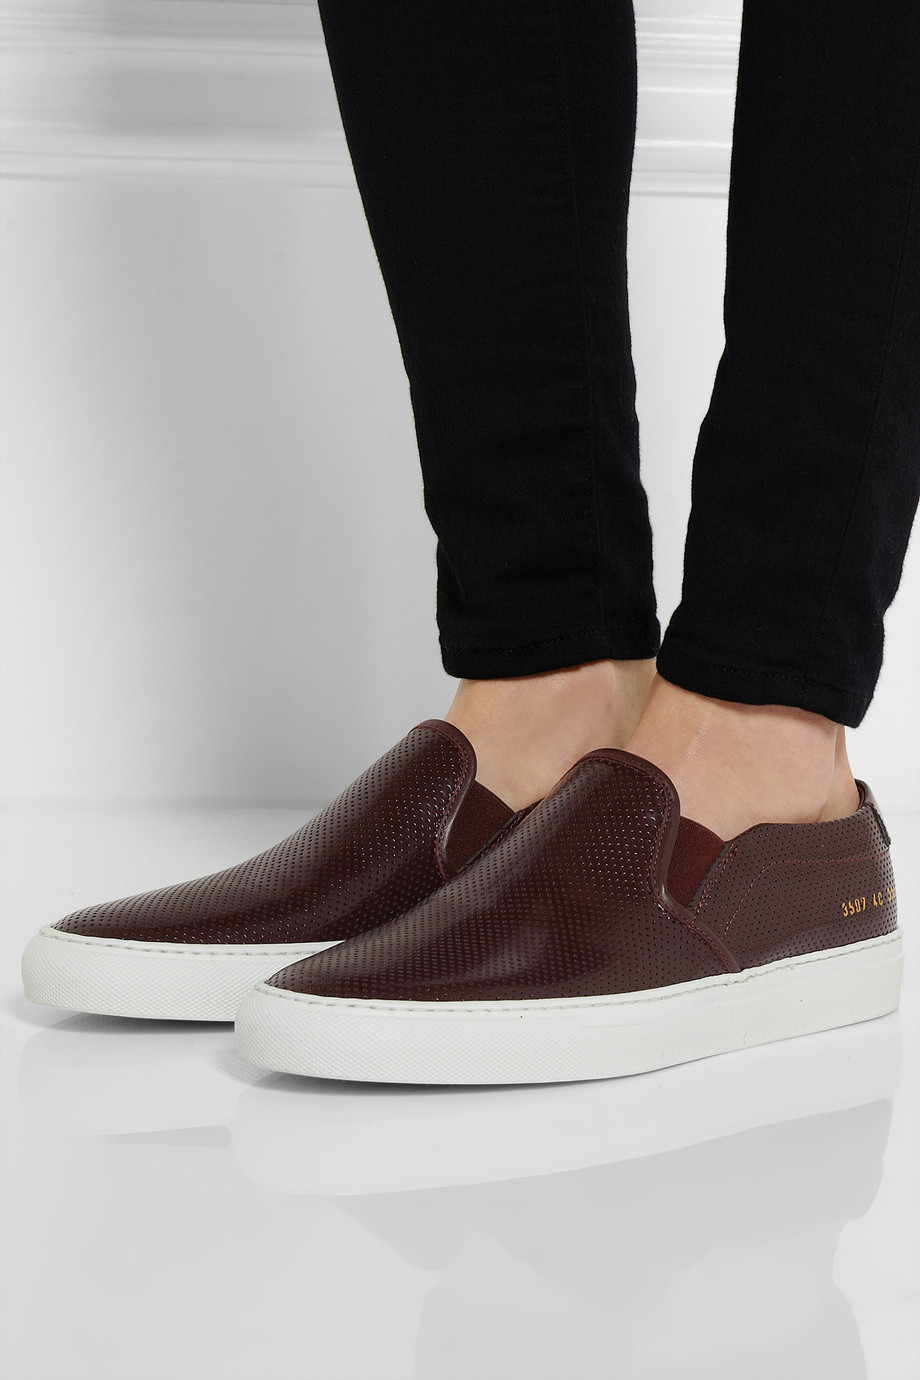 Common Projects Leather Slip On Top Sellers, UP TO 59% OFF |  www.cobaleda-garcia.com